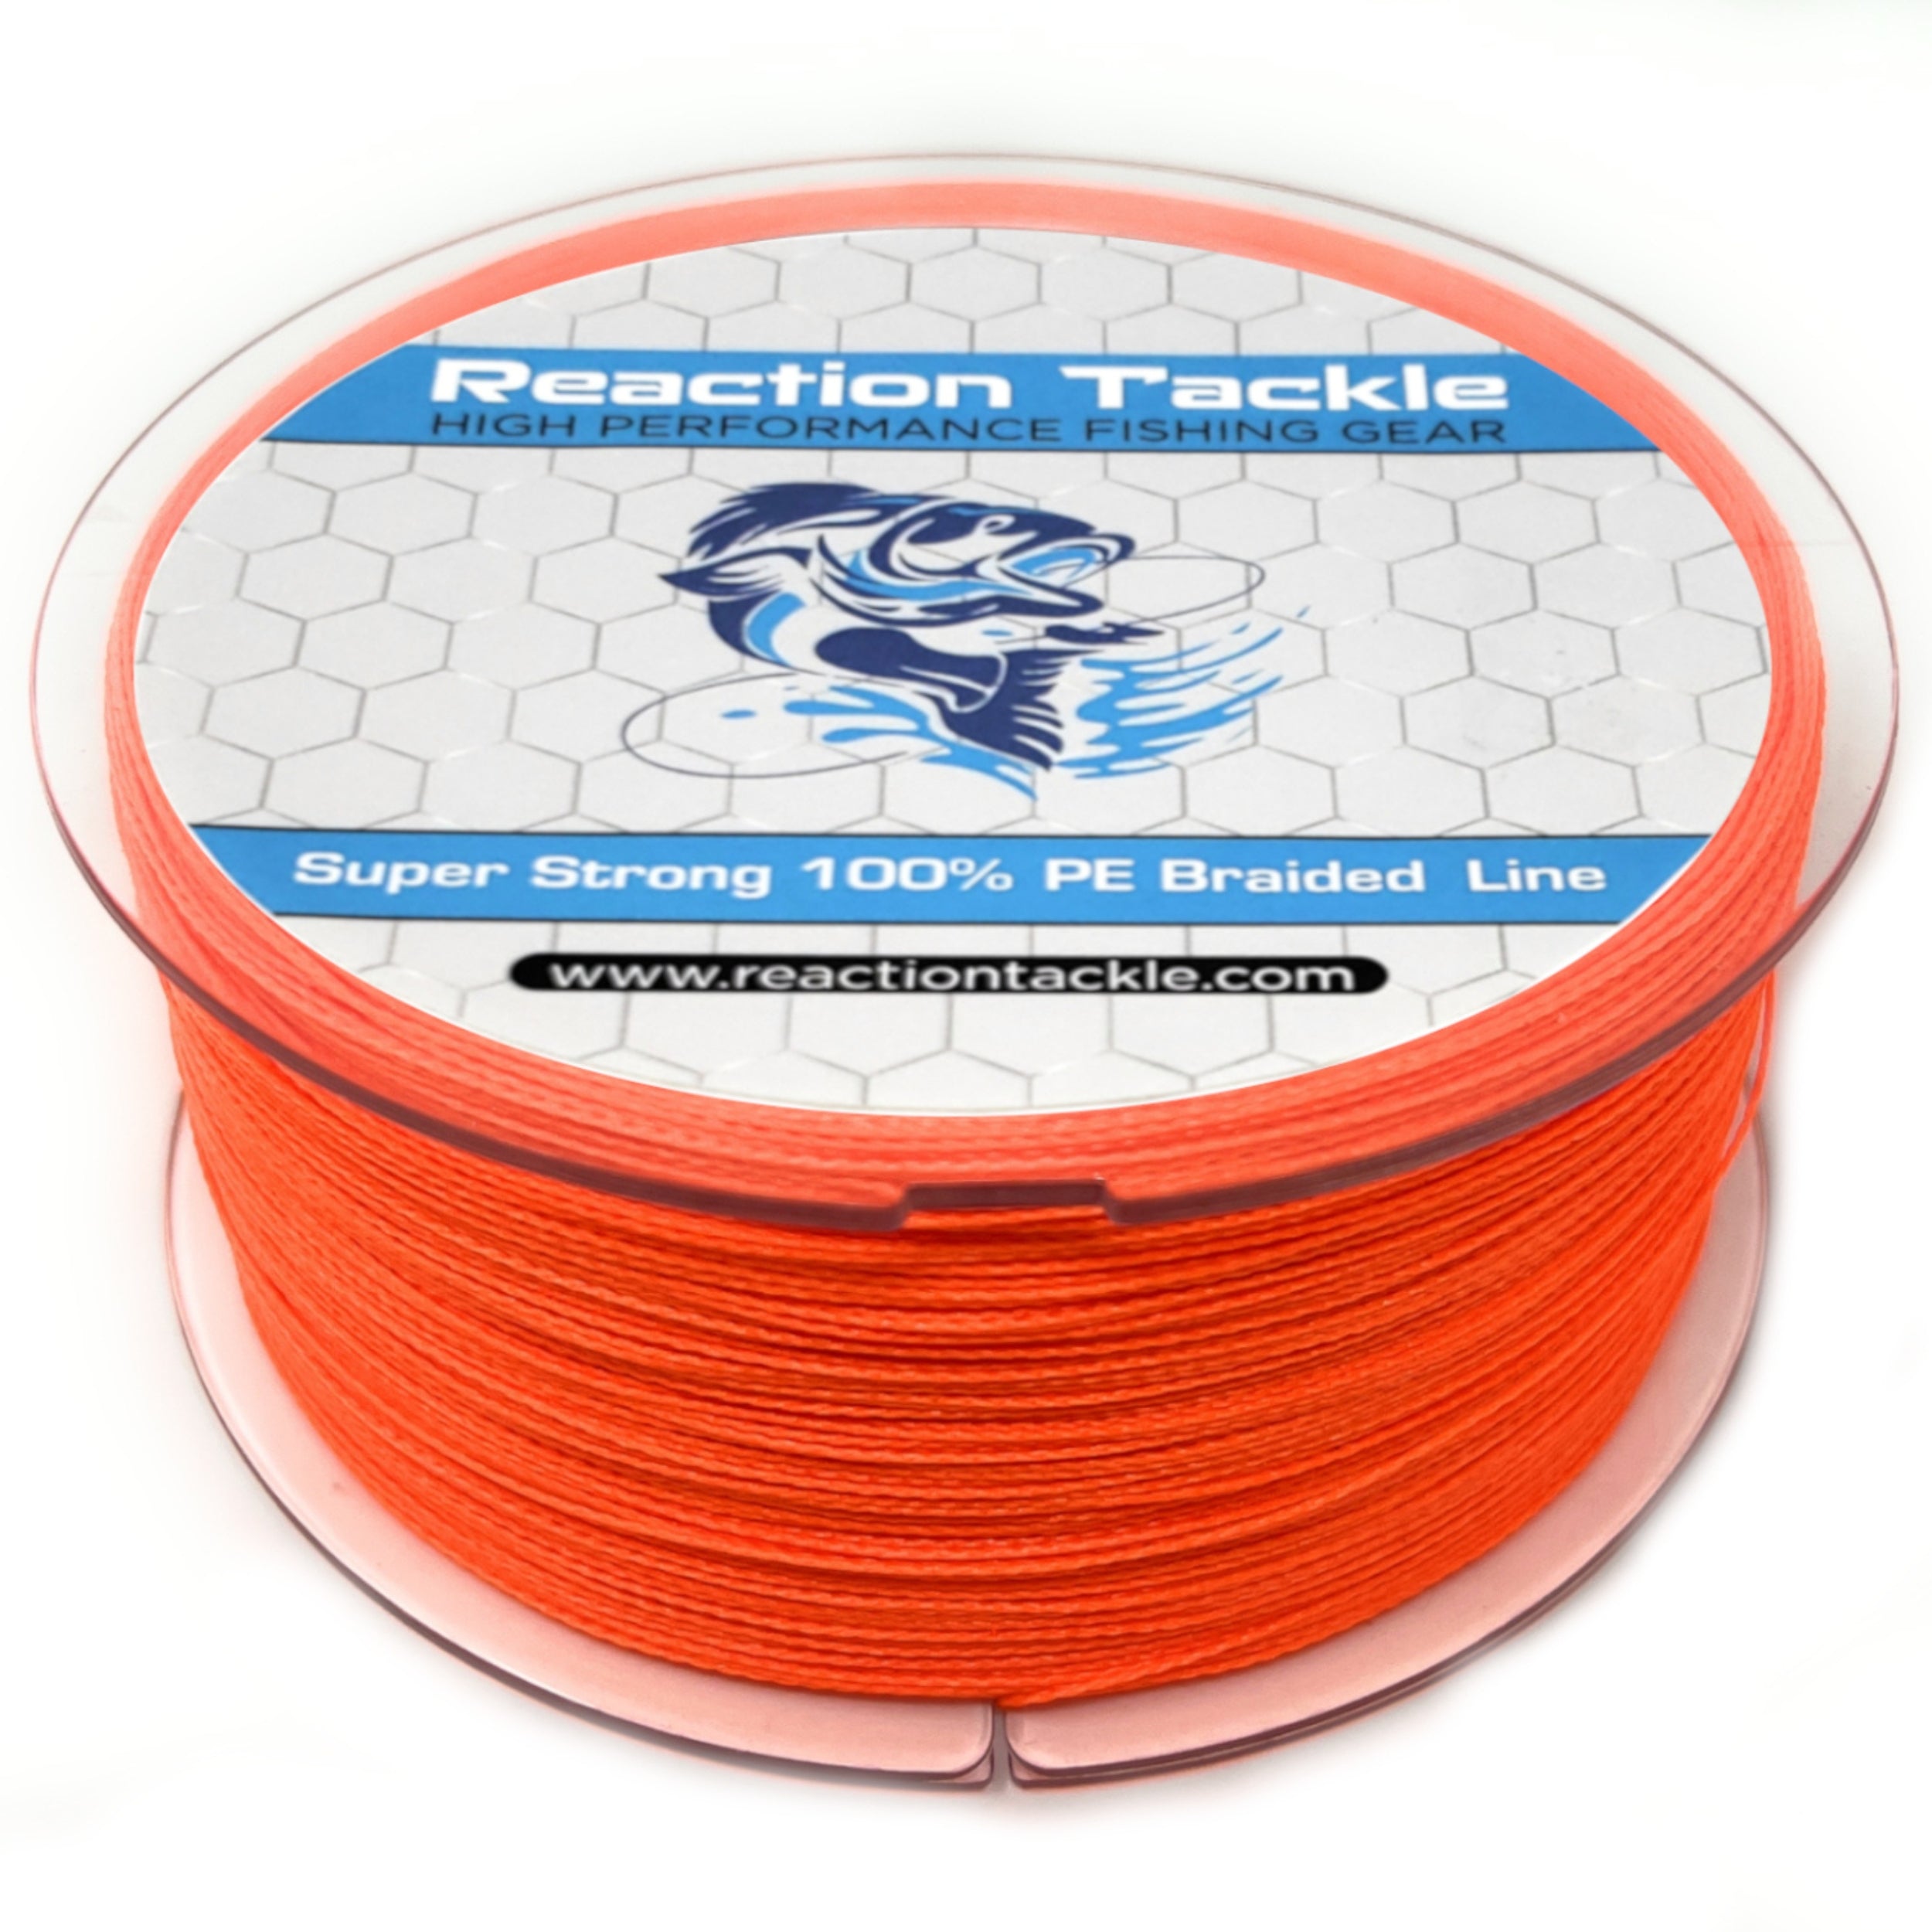 Reaction Tackle High Performance Braided Fishing Line/Fishing